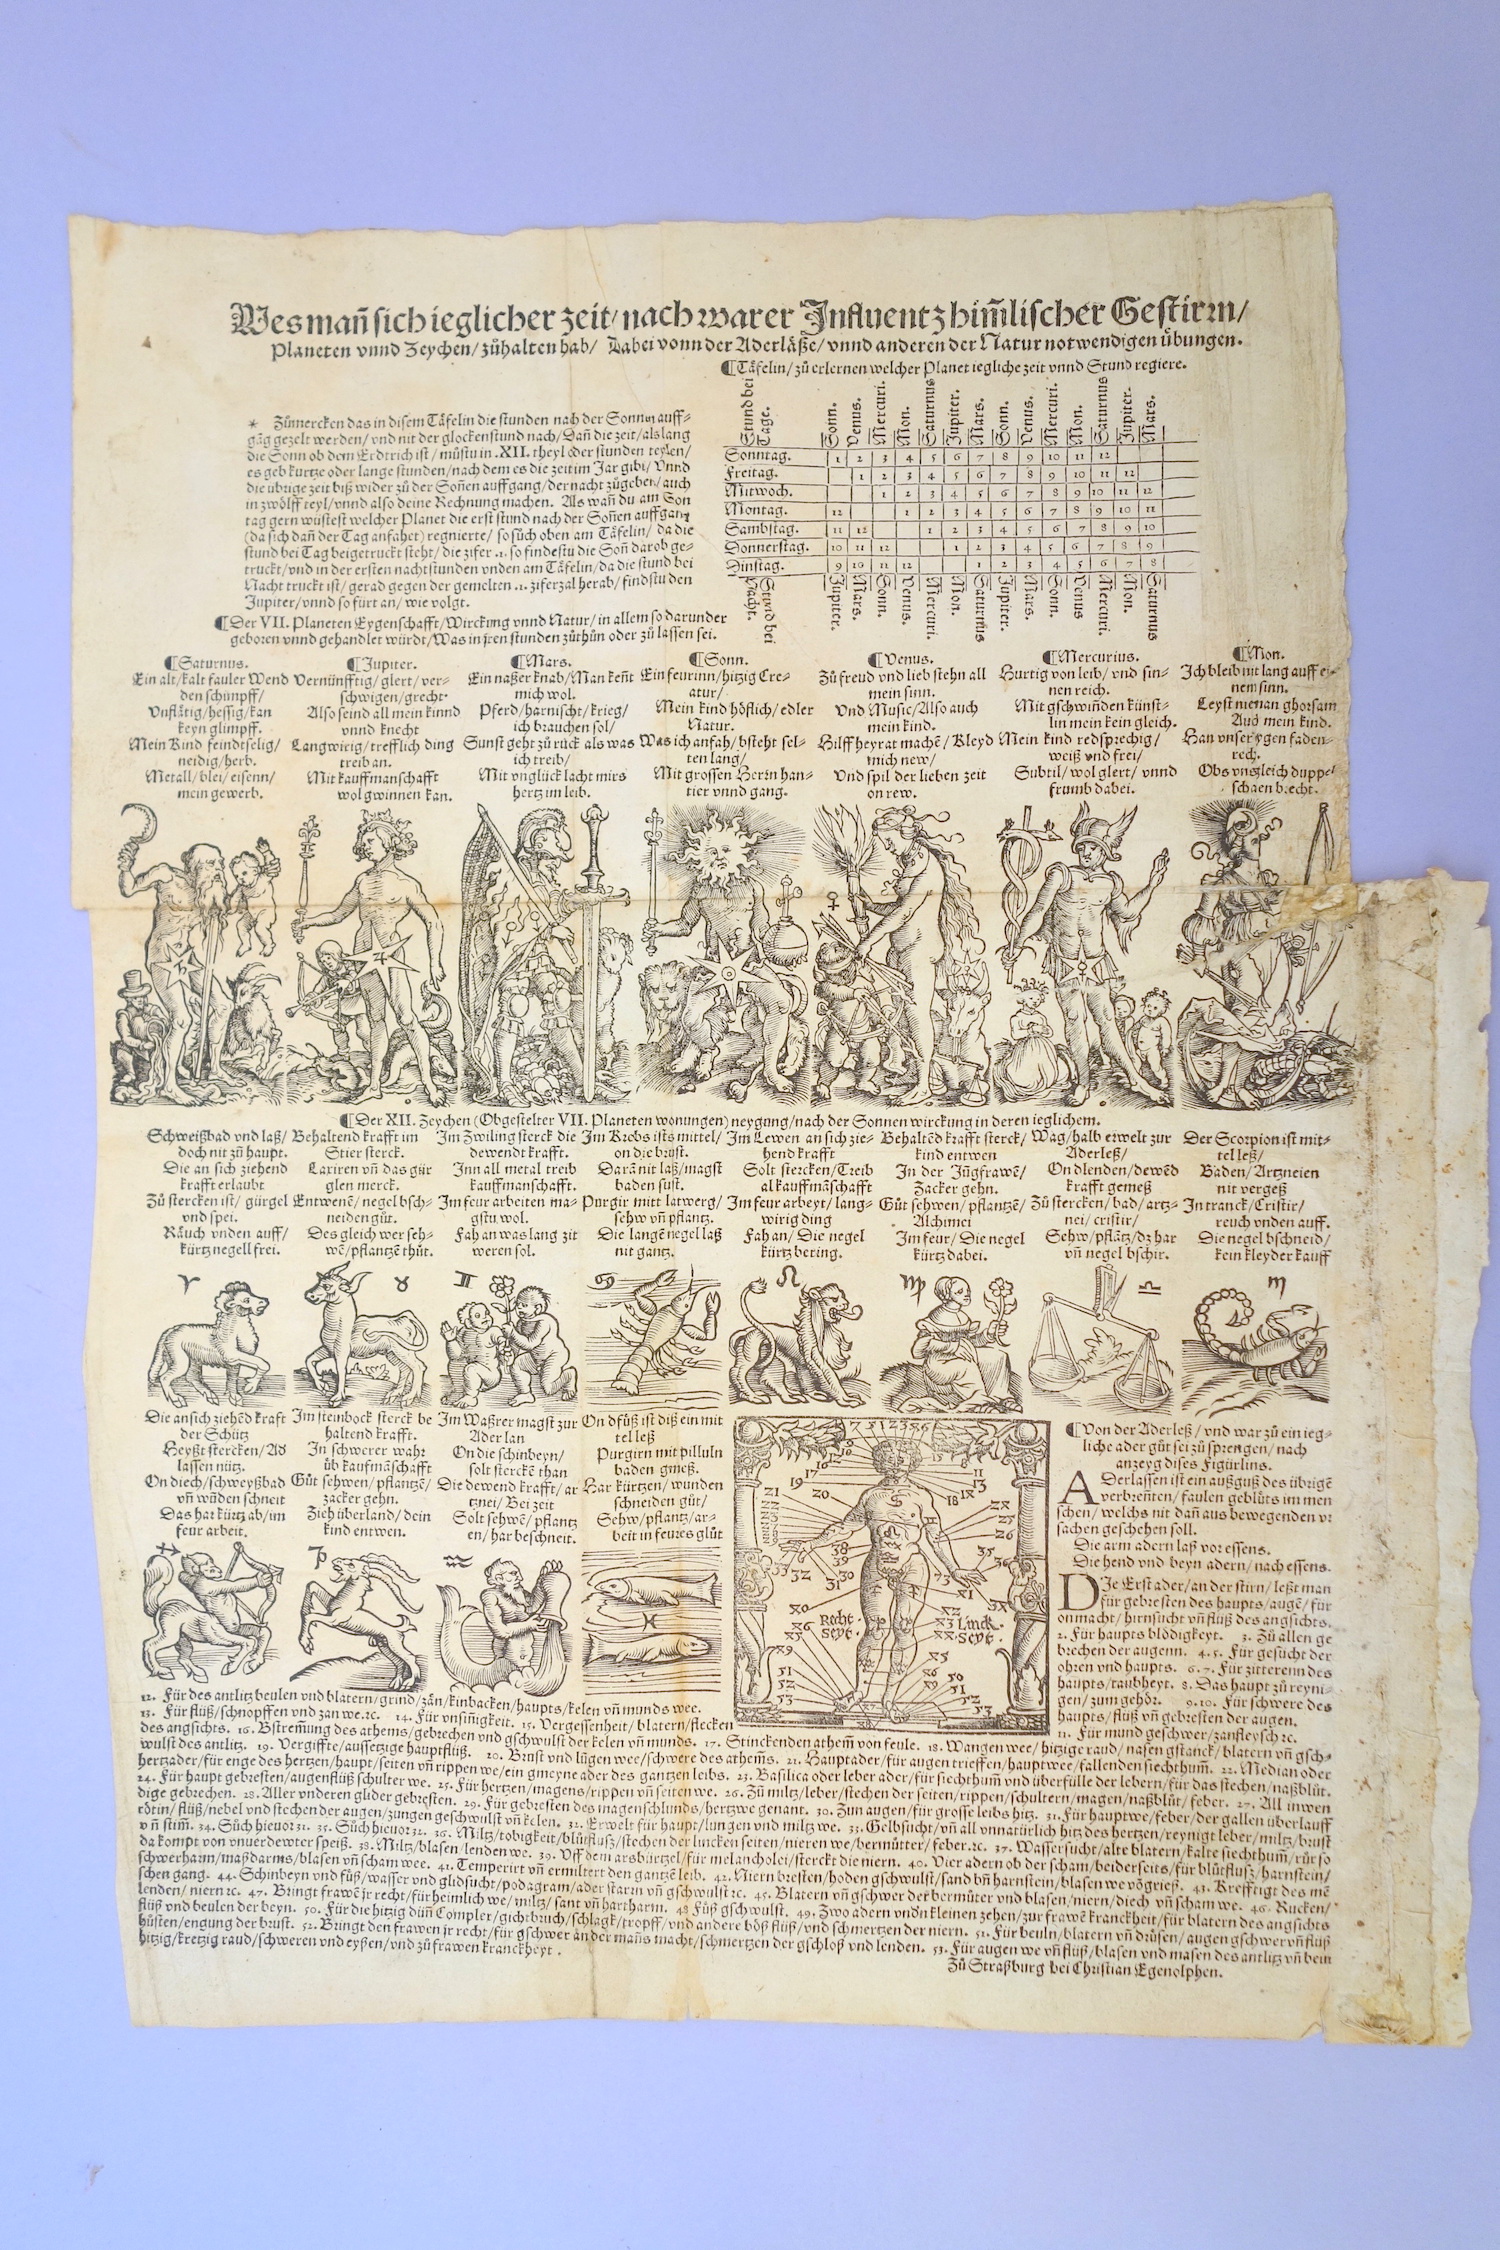 A bloodletting calendar printed between 1528 and 1530: Wes man sich ieglicher zeit / nach warer Influentz himlischer Gestirn / Planeten unnd Zeychen / zühalten hab / Dabei vonn der Aderlaße / unnd anderen der Natur notwendigen übungen [How to maintain (health) at any time, according to the influence of the celestial stars, planets and signs, by means of bloodletting and other exercises necessary to Nature.] Broadsheet, printed on one side in black letter type. Woodcut illustrations. Strasburg: Christian Egenolph, n.d. [ca. 1528-30]. 285 x 405 mm. The stub on the right is evidence that this ephemeral sheet survived by being bound into a book, from which it was later removed.